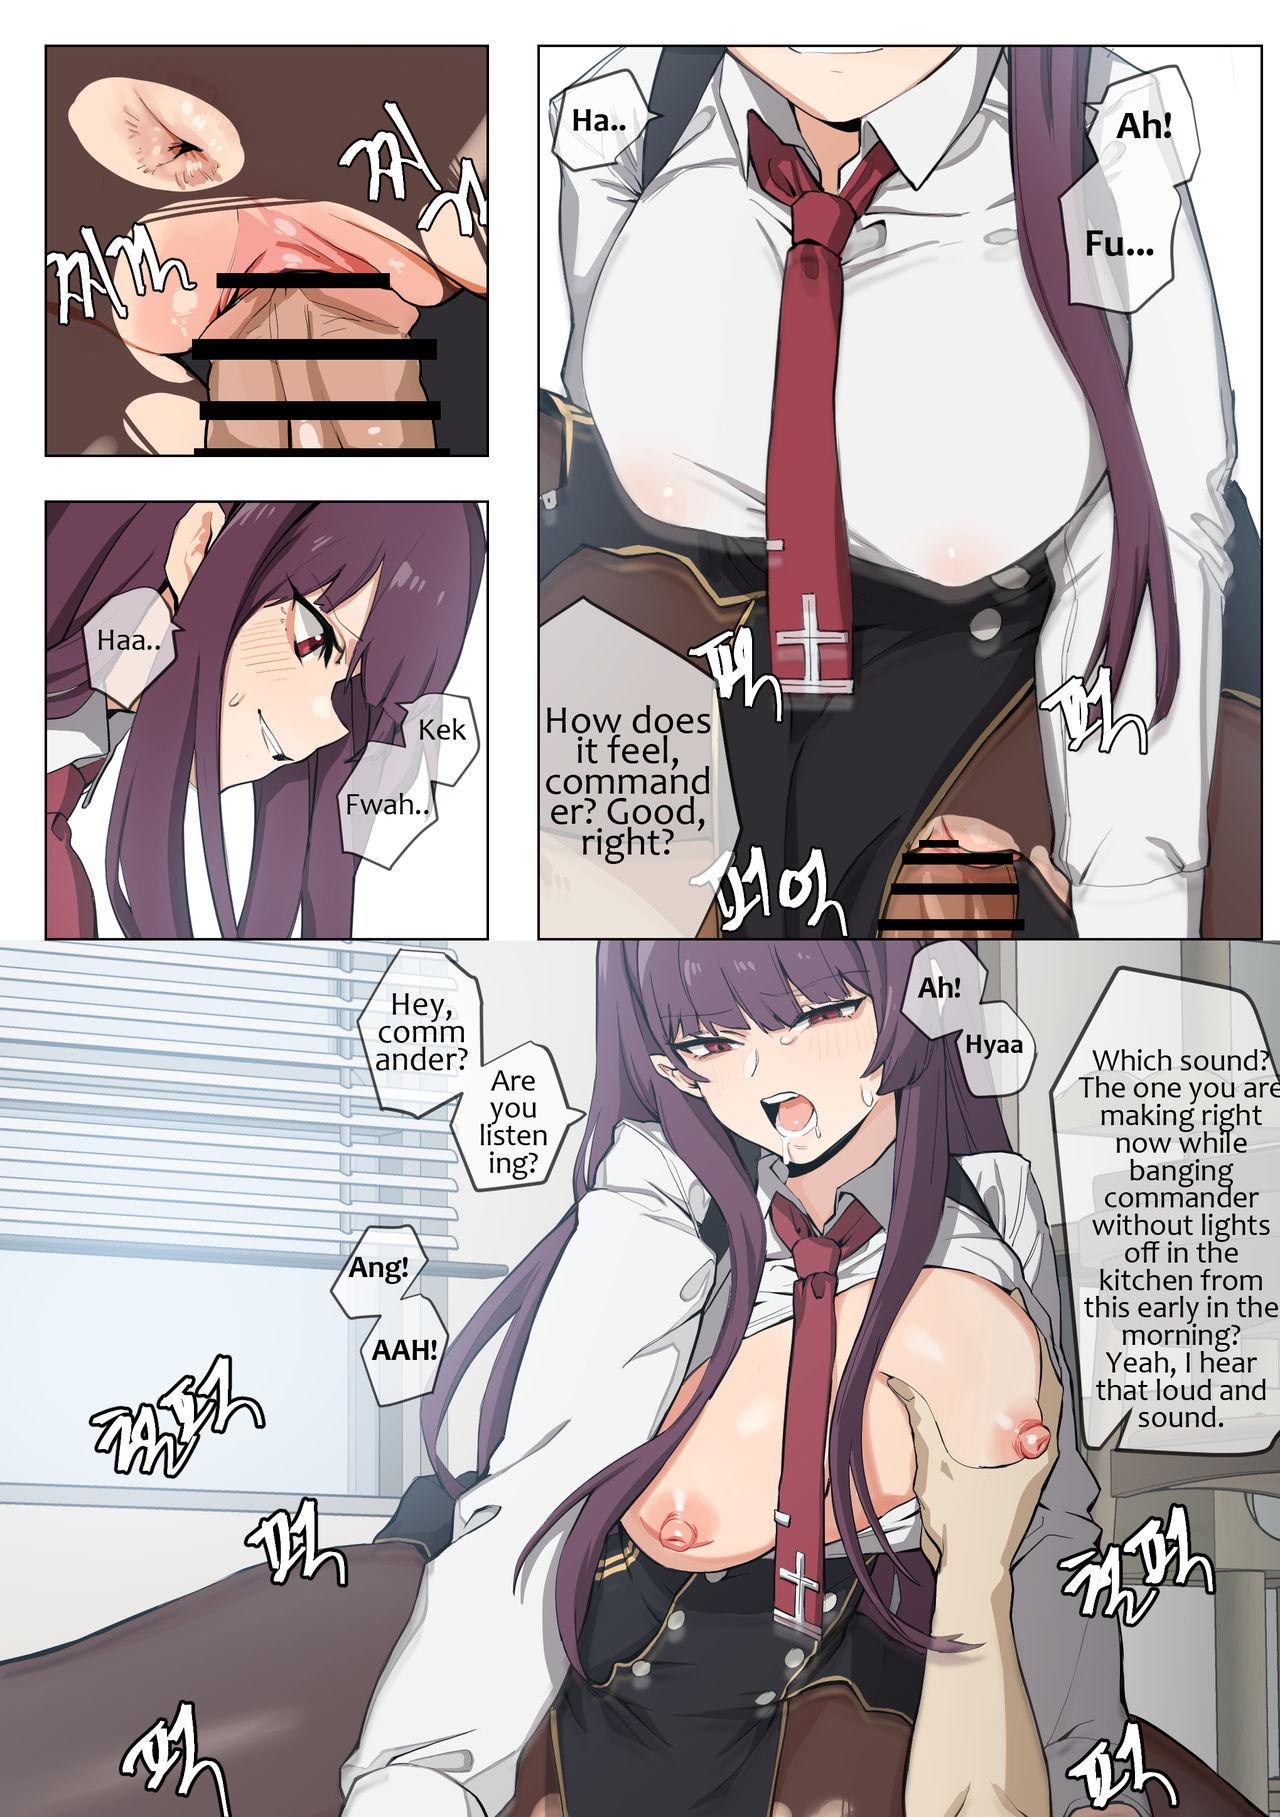 First Time WA2000 - Girls frontline Pregnant - Page 5